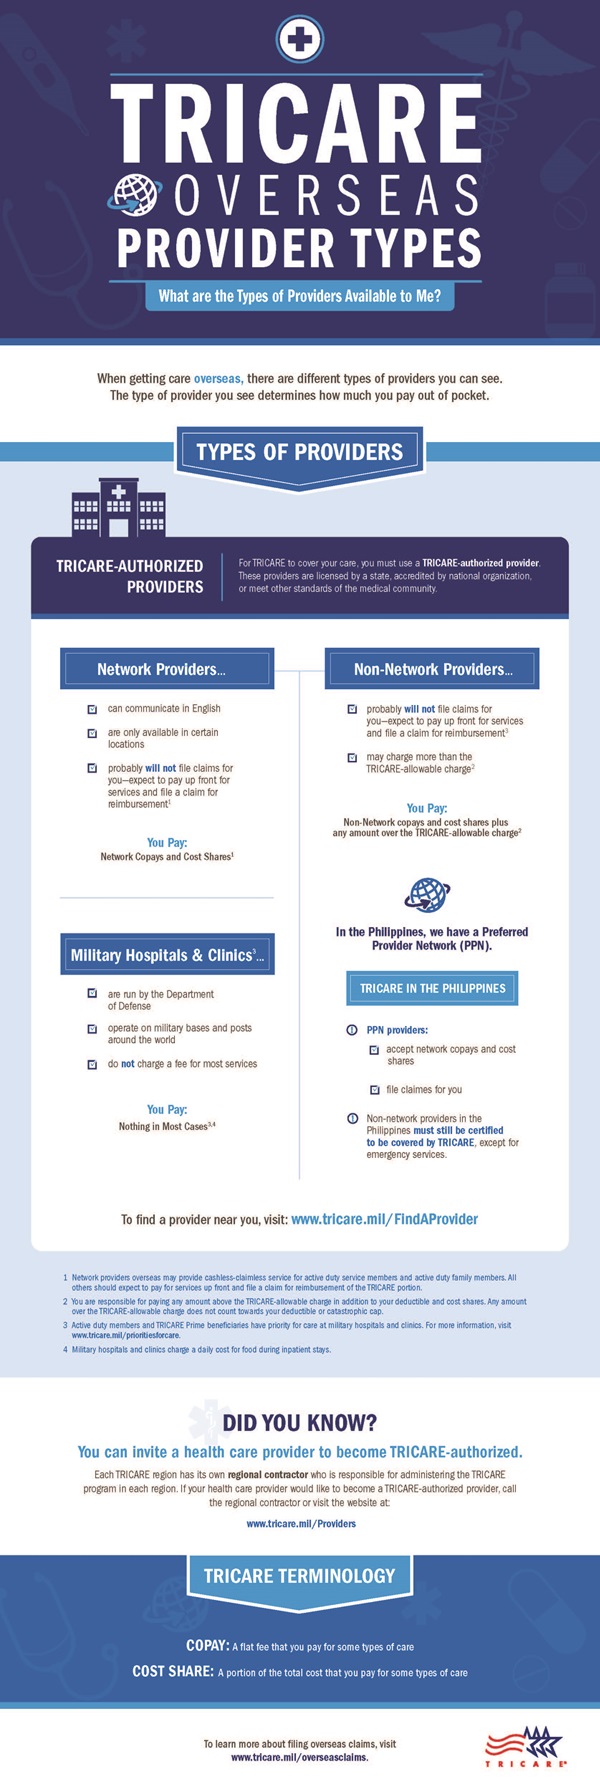 TRICARE Overseas Provider Infographic